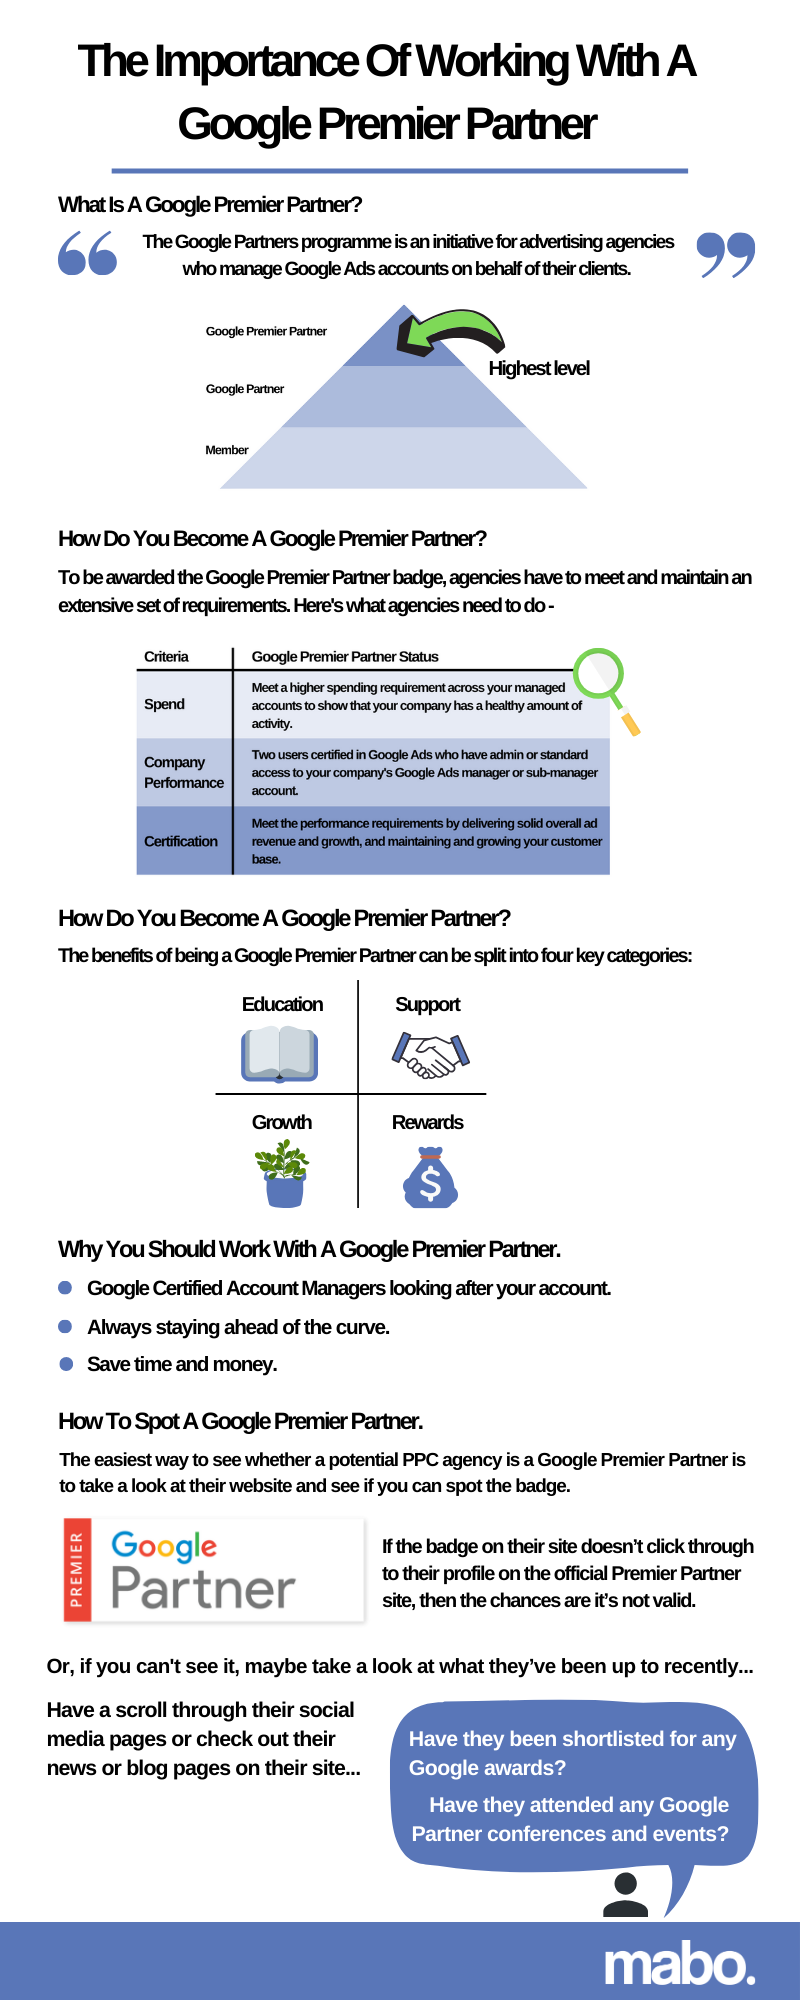 The Importance Of Working With A Google Premier Partner